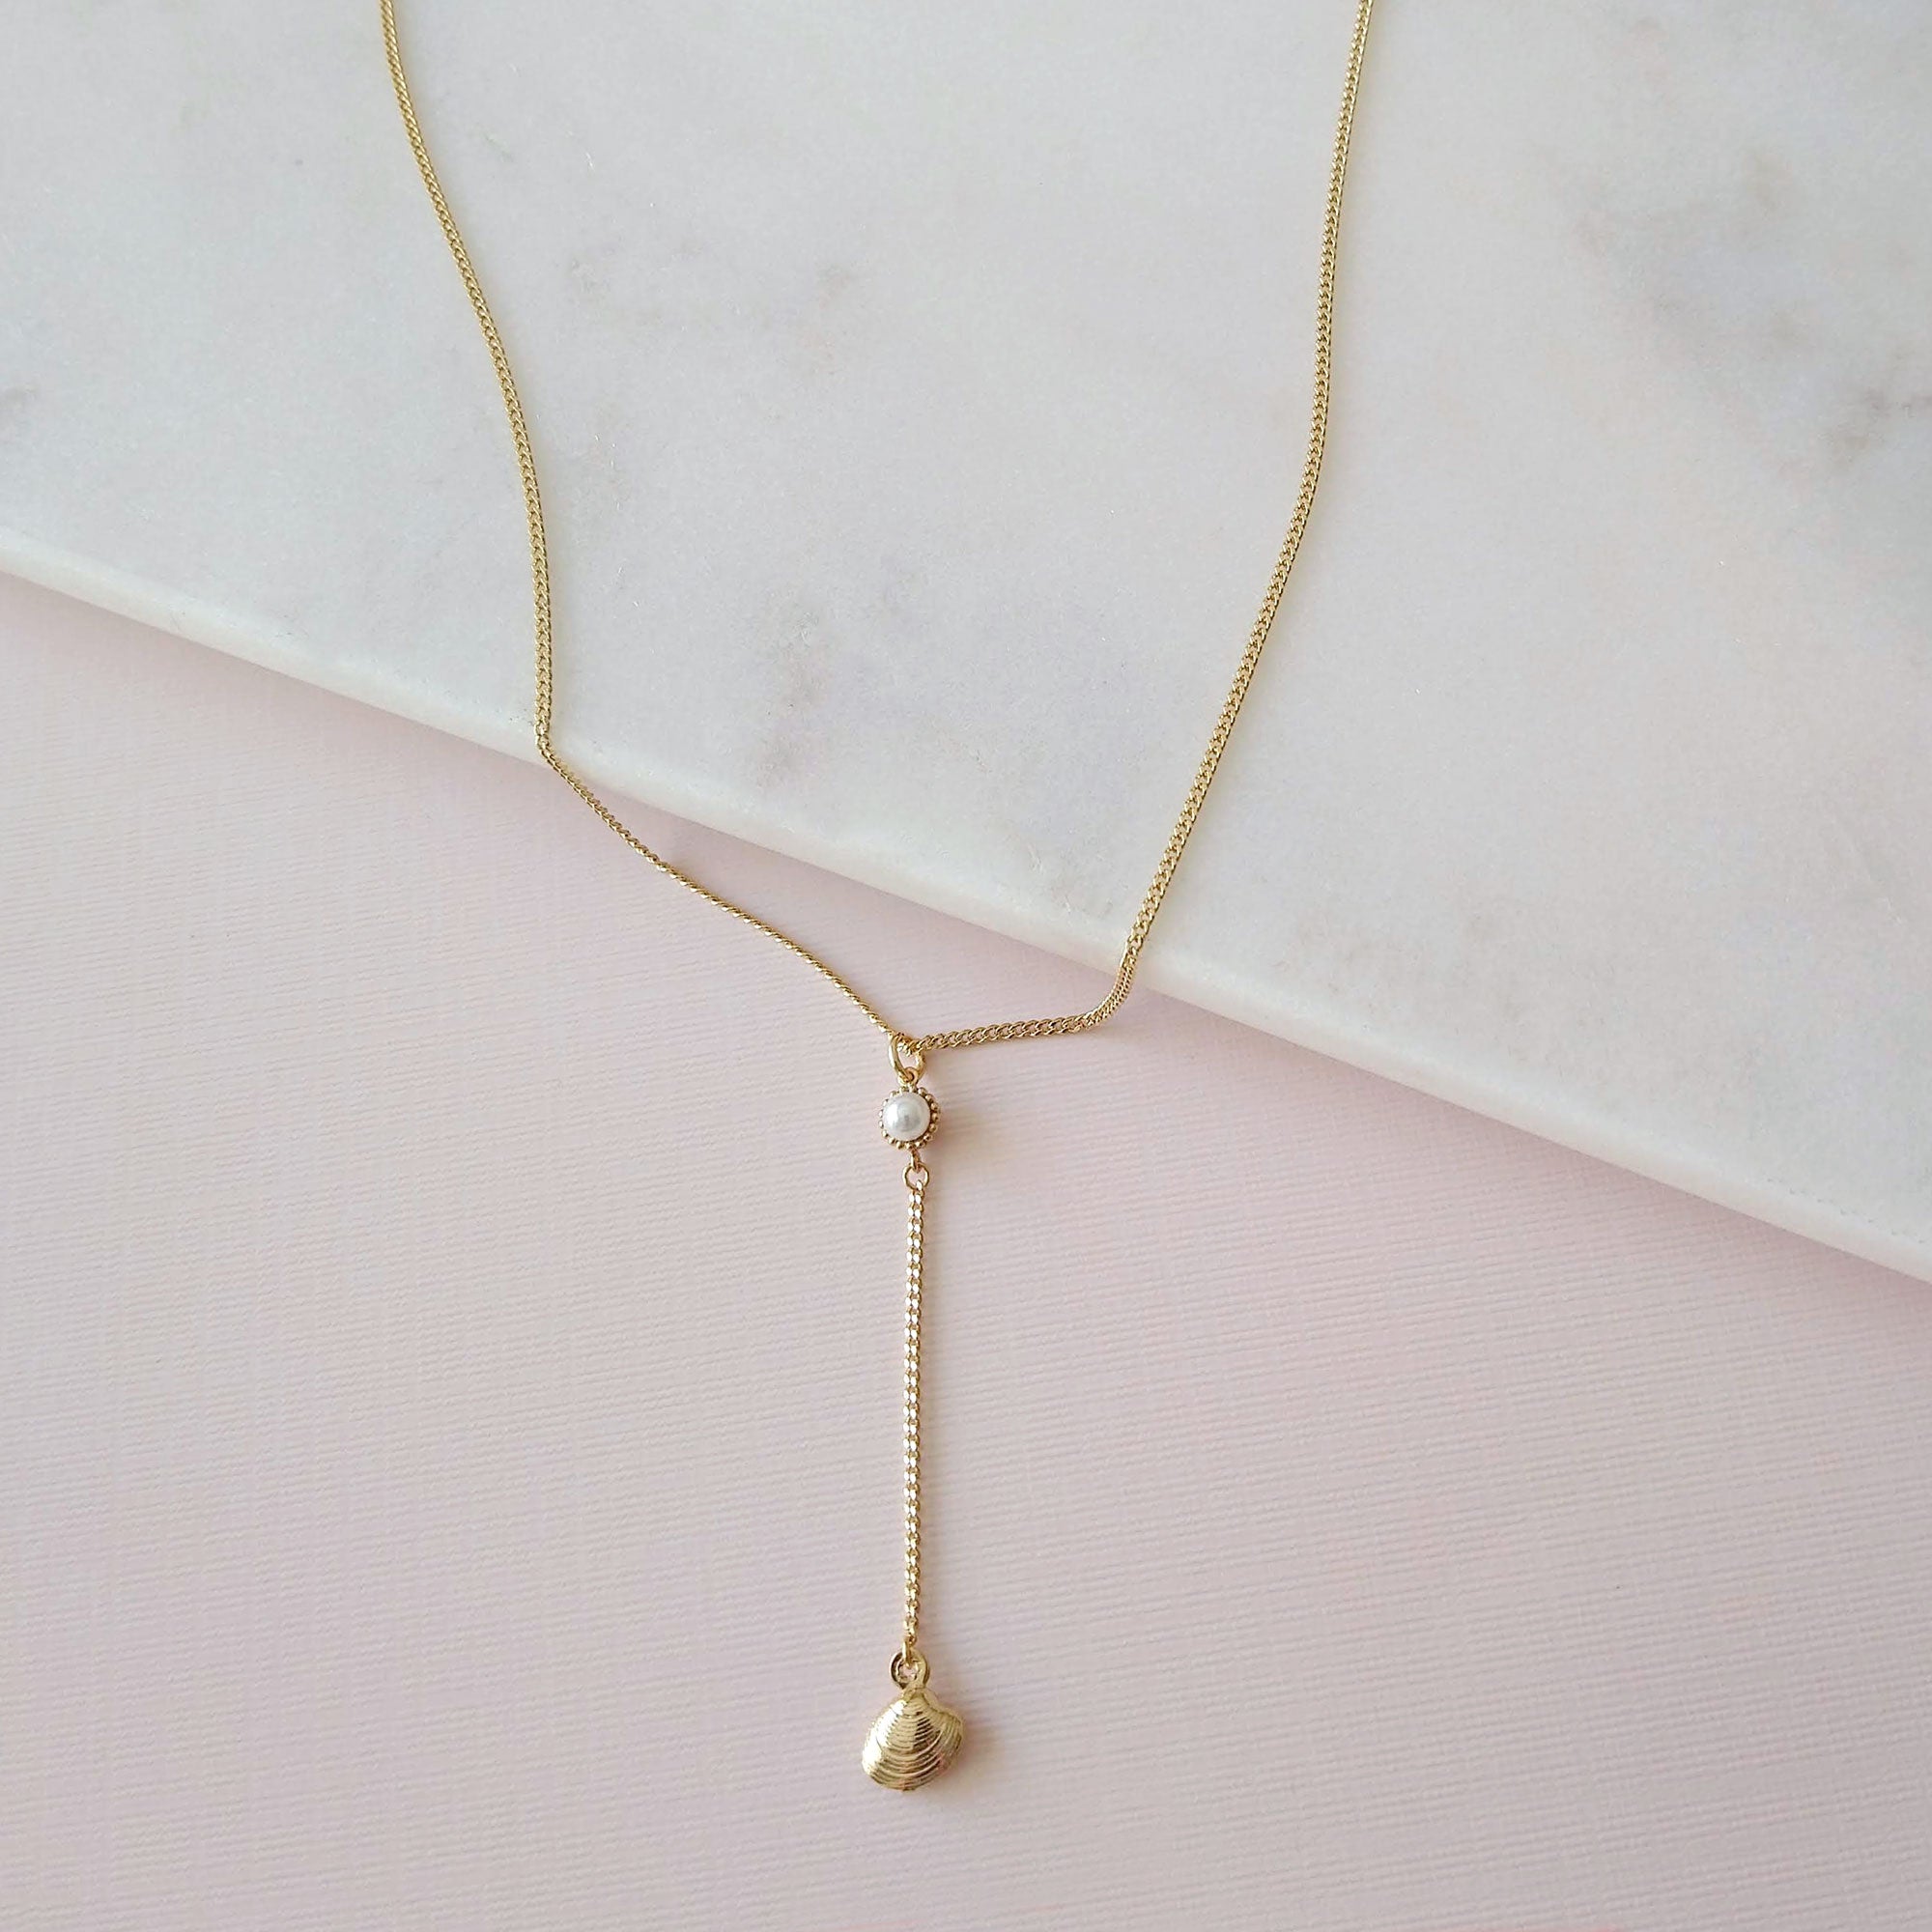 Lariat necklace with pearl and seashell pendant